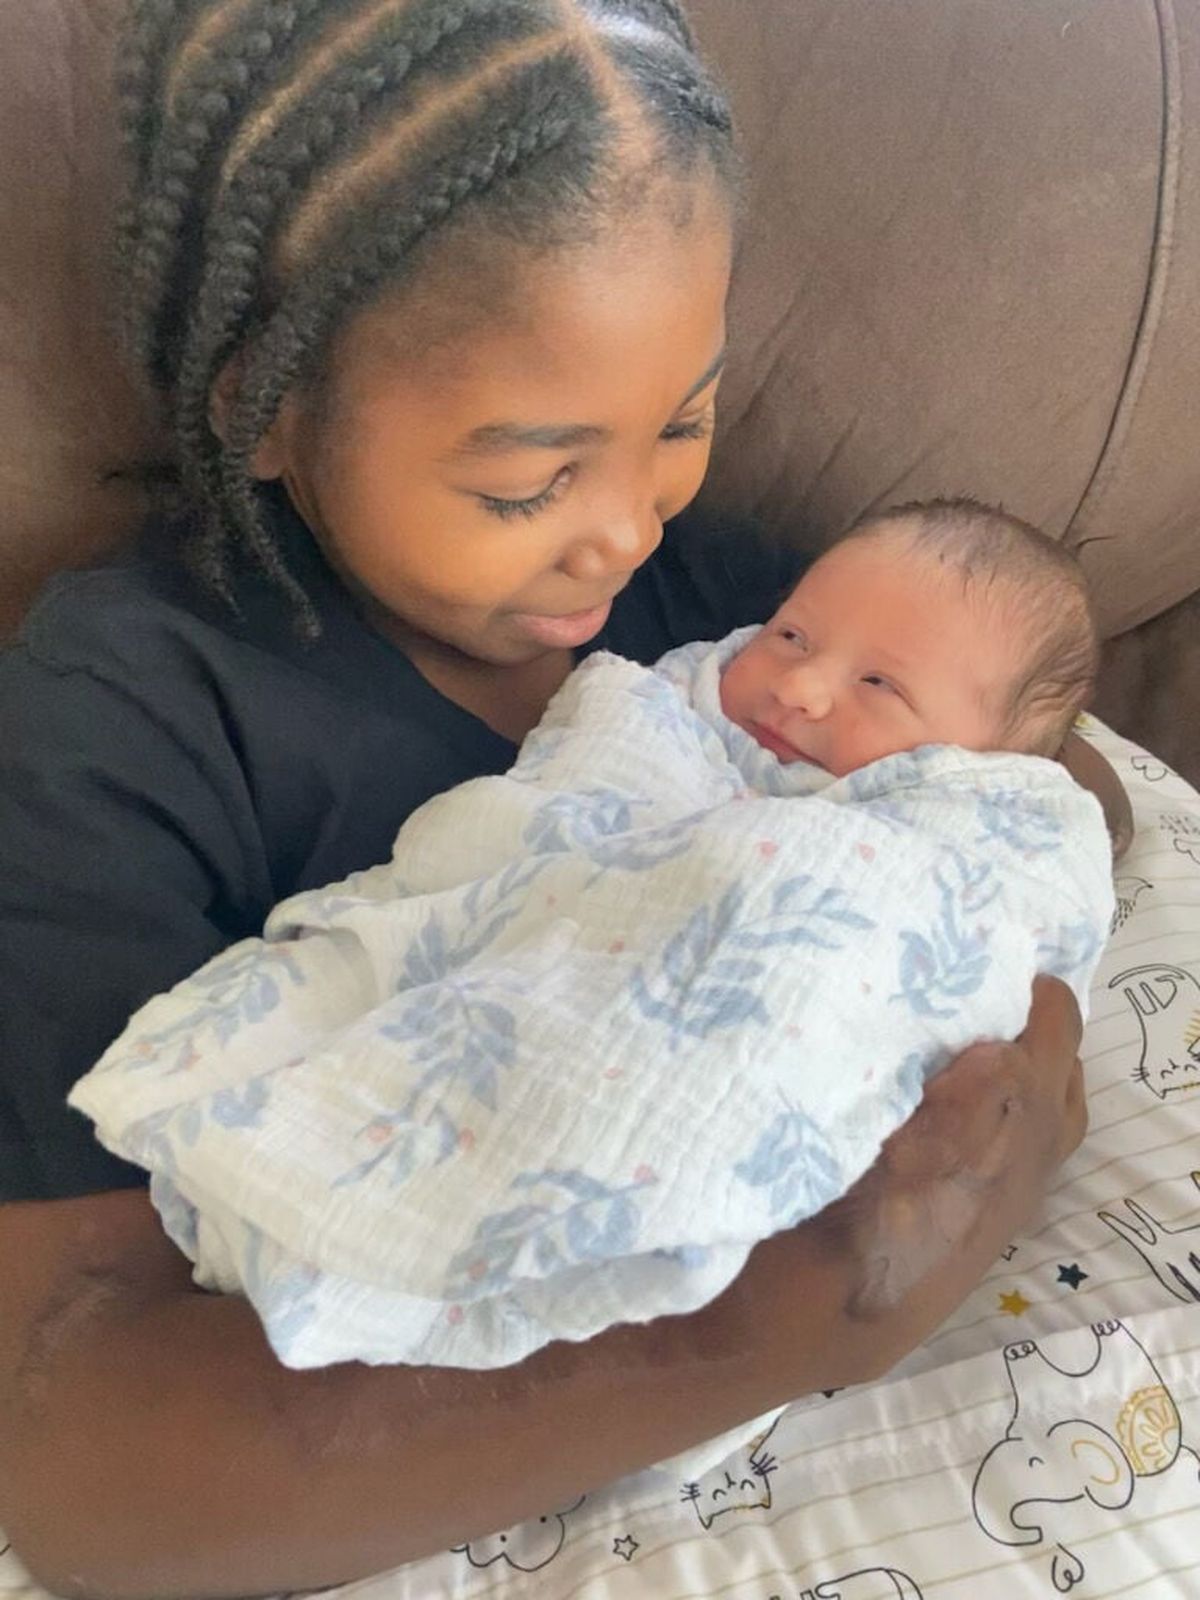 Nate with his newborn sister, Julien. MUST CREDIT: Family photo.  (Family photo/Handout)